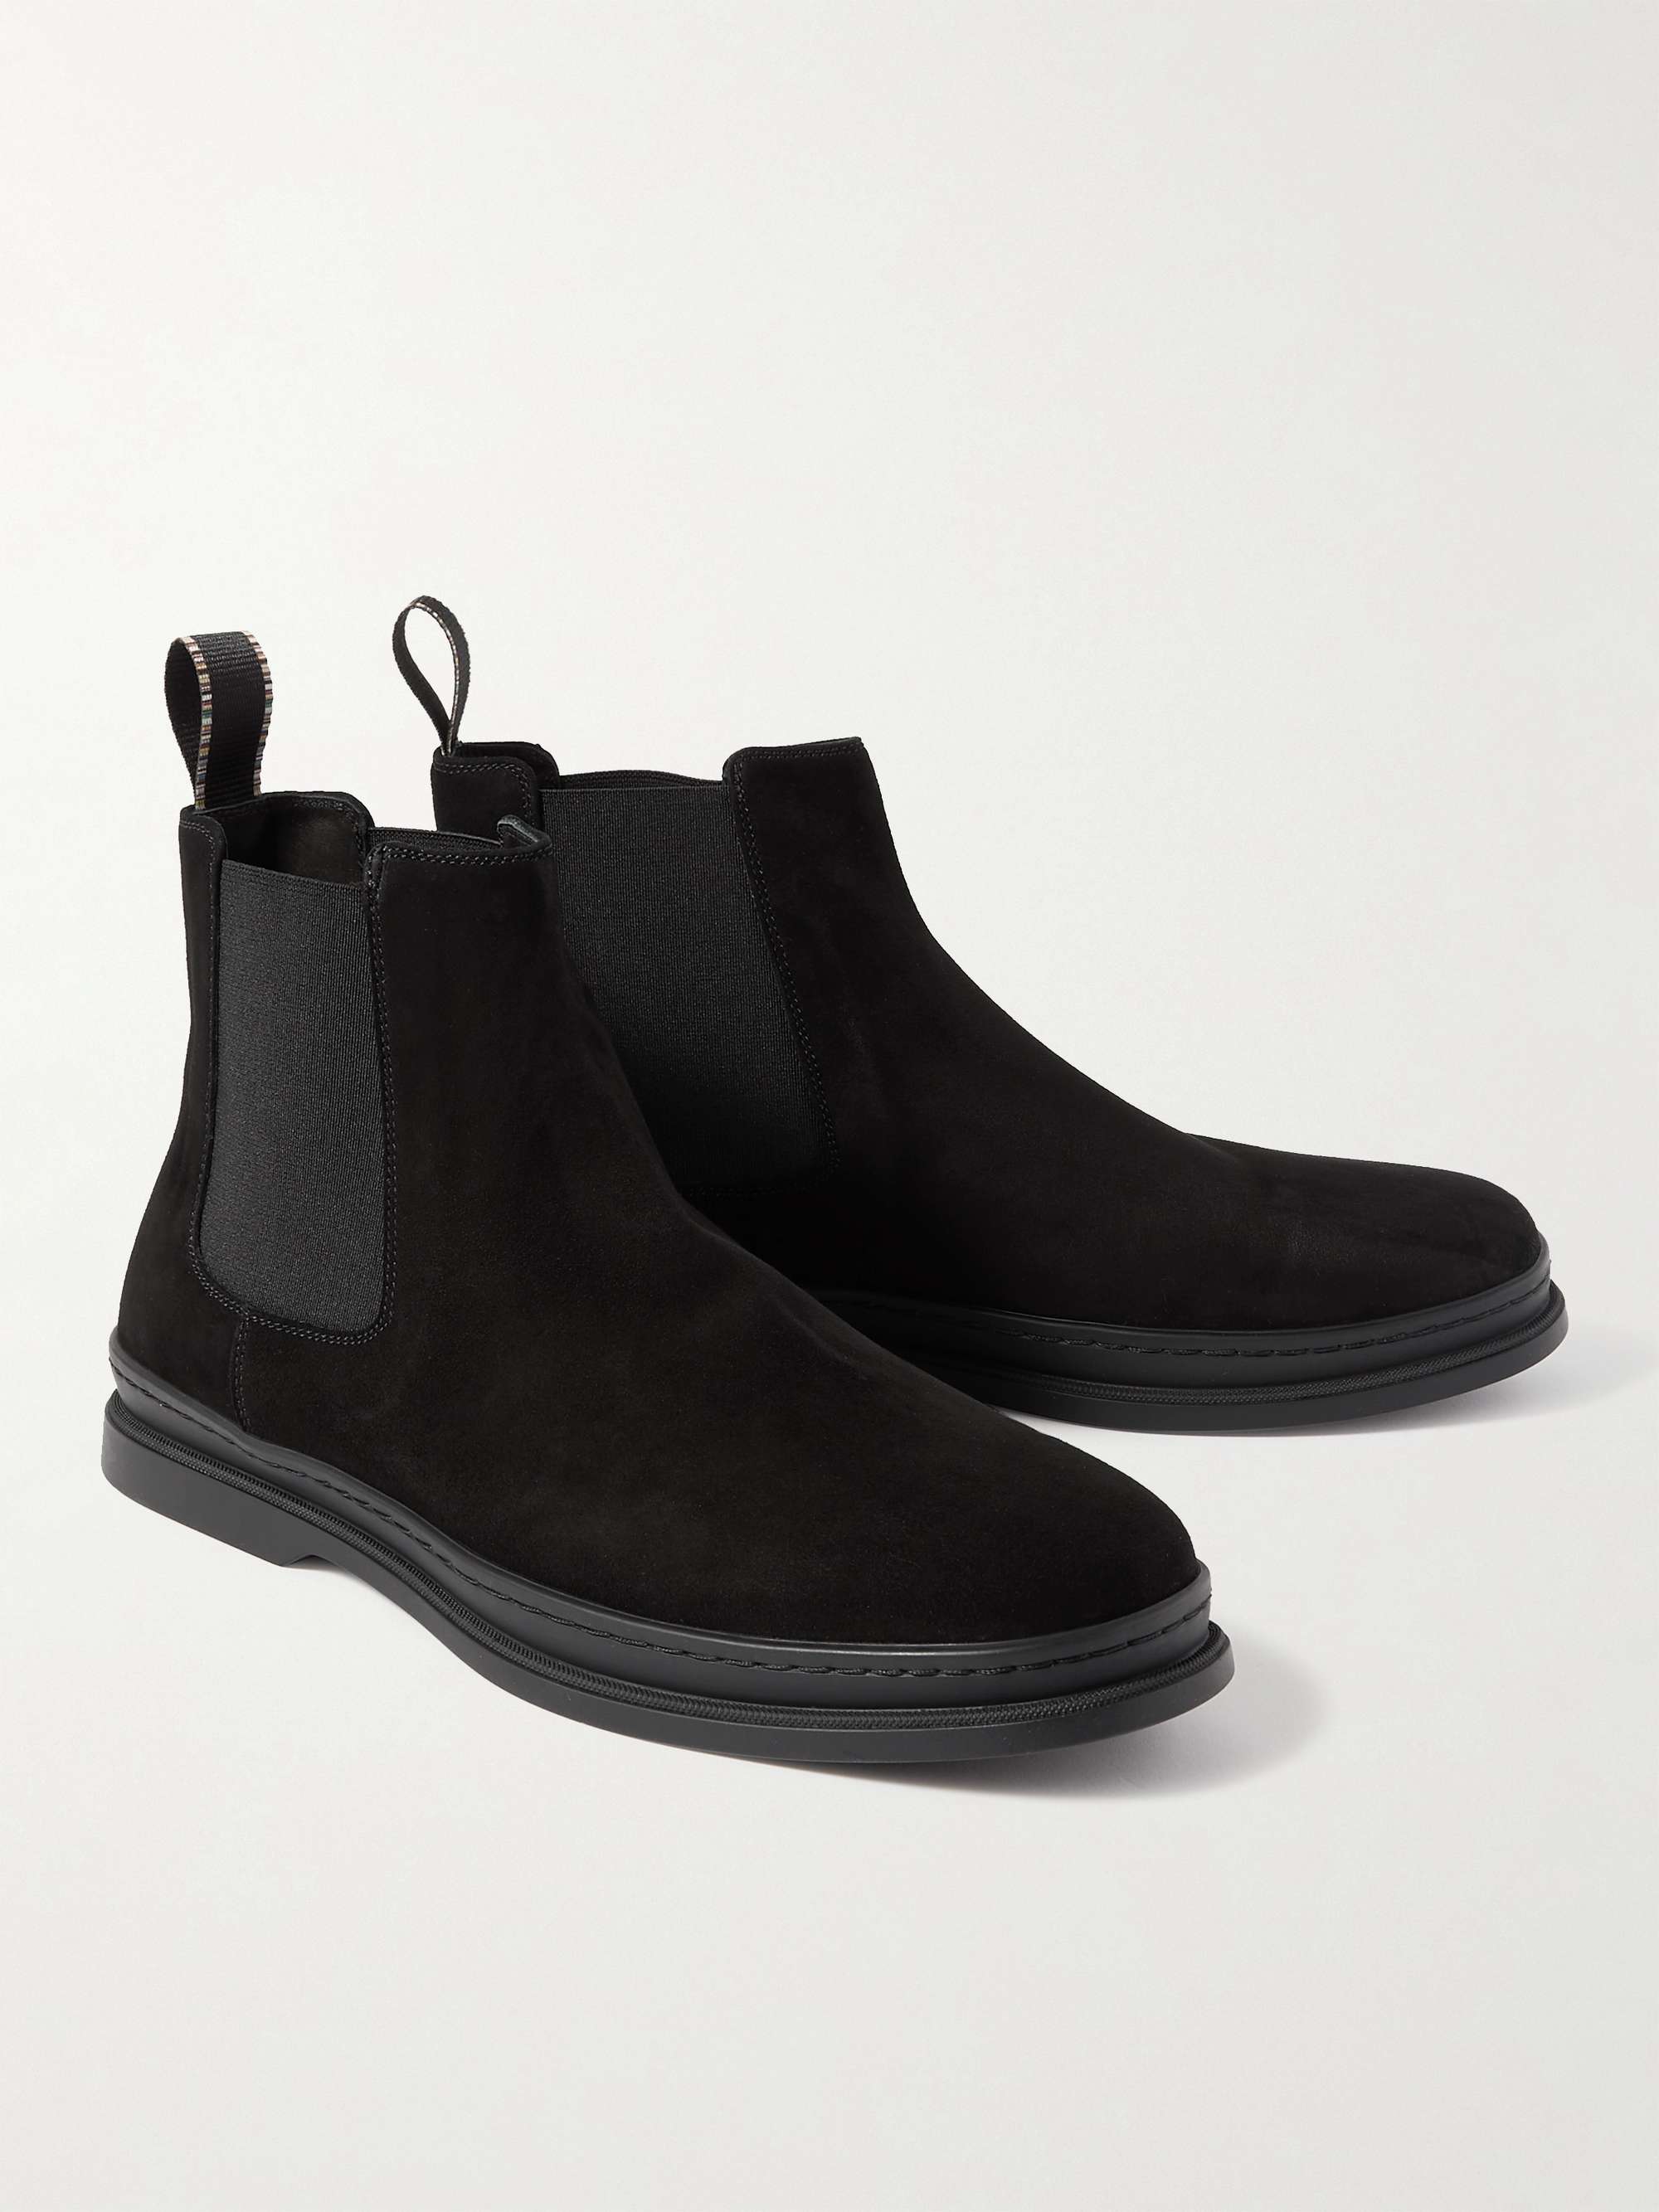 PAUL SMITH Ugo Suede Chelsea Boots MR PORTER